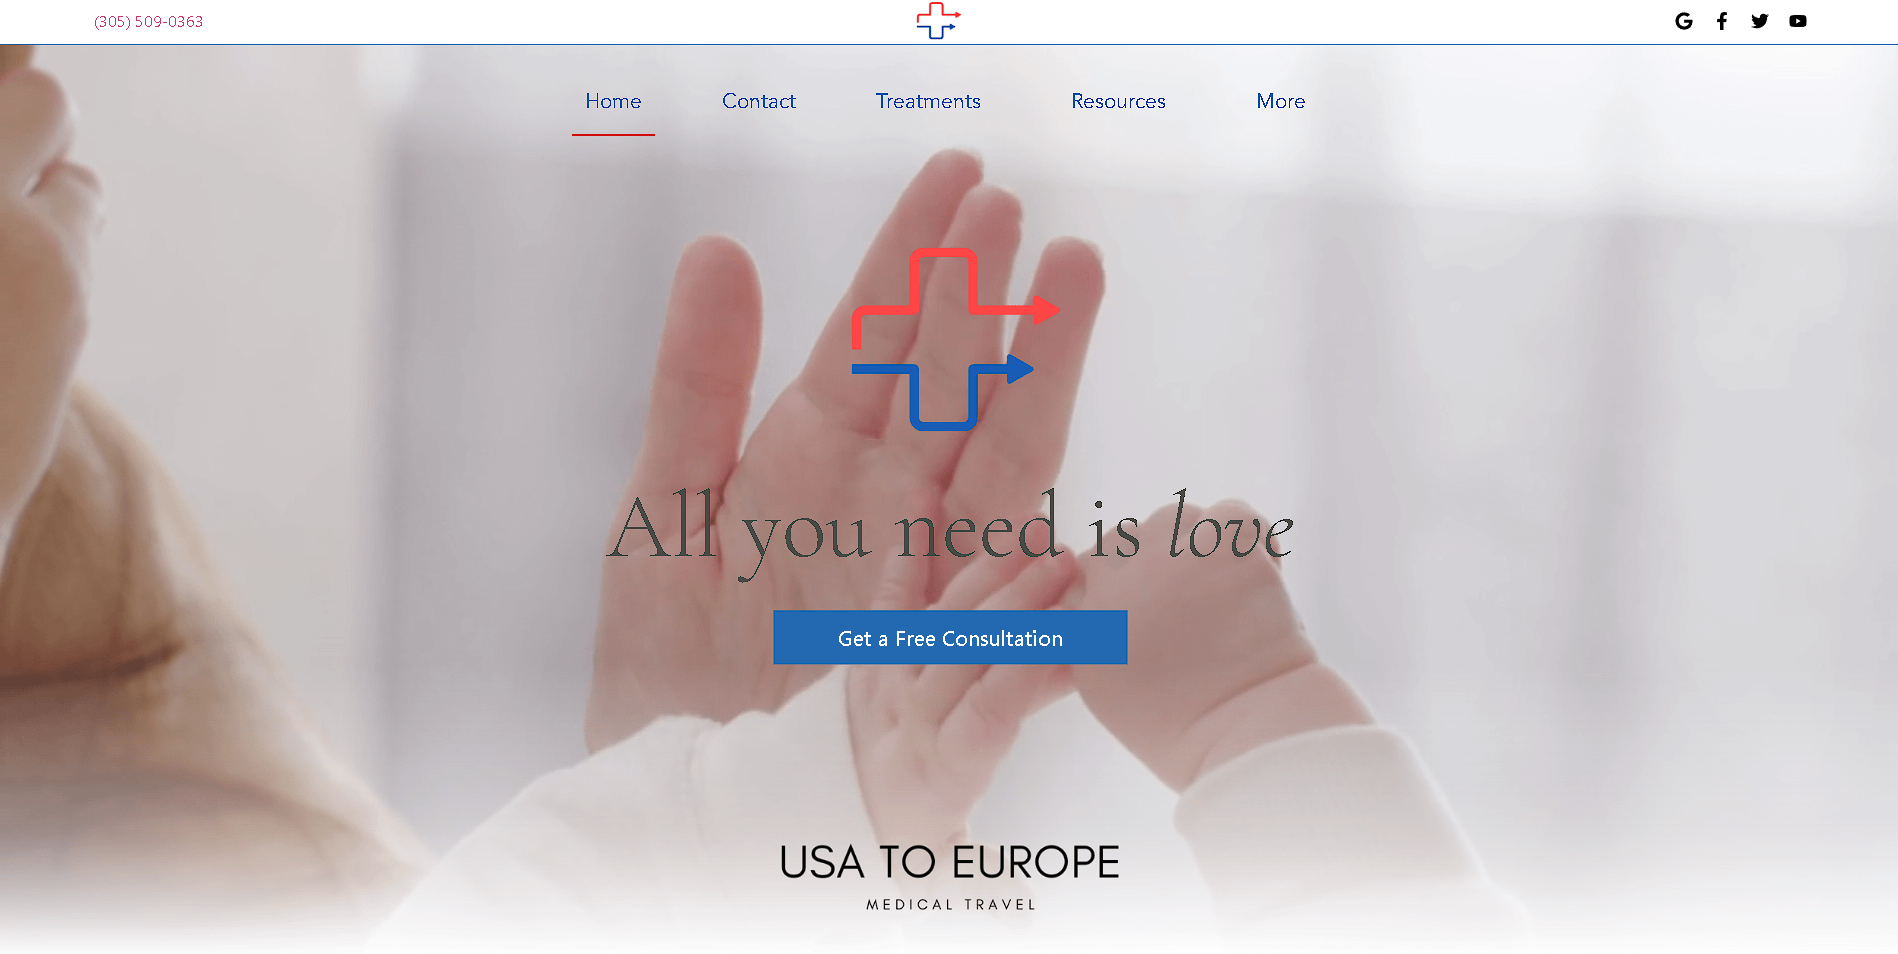 WordPress Website Design example for USA To Europe Medical Travel company in Miami